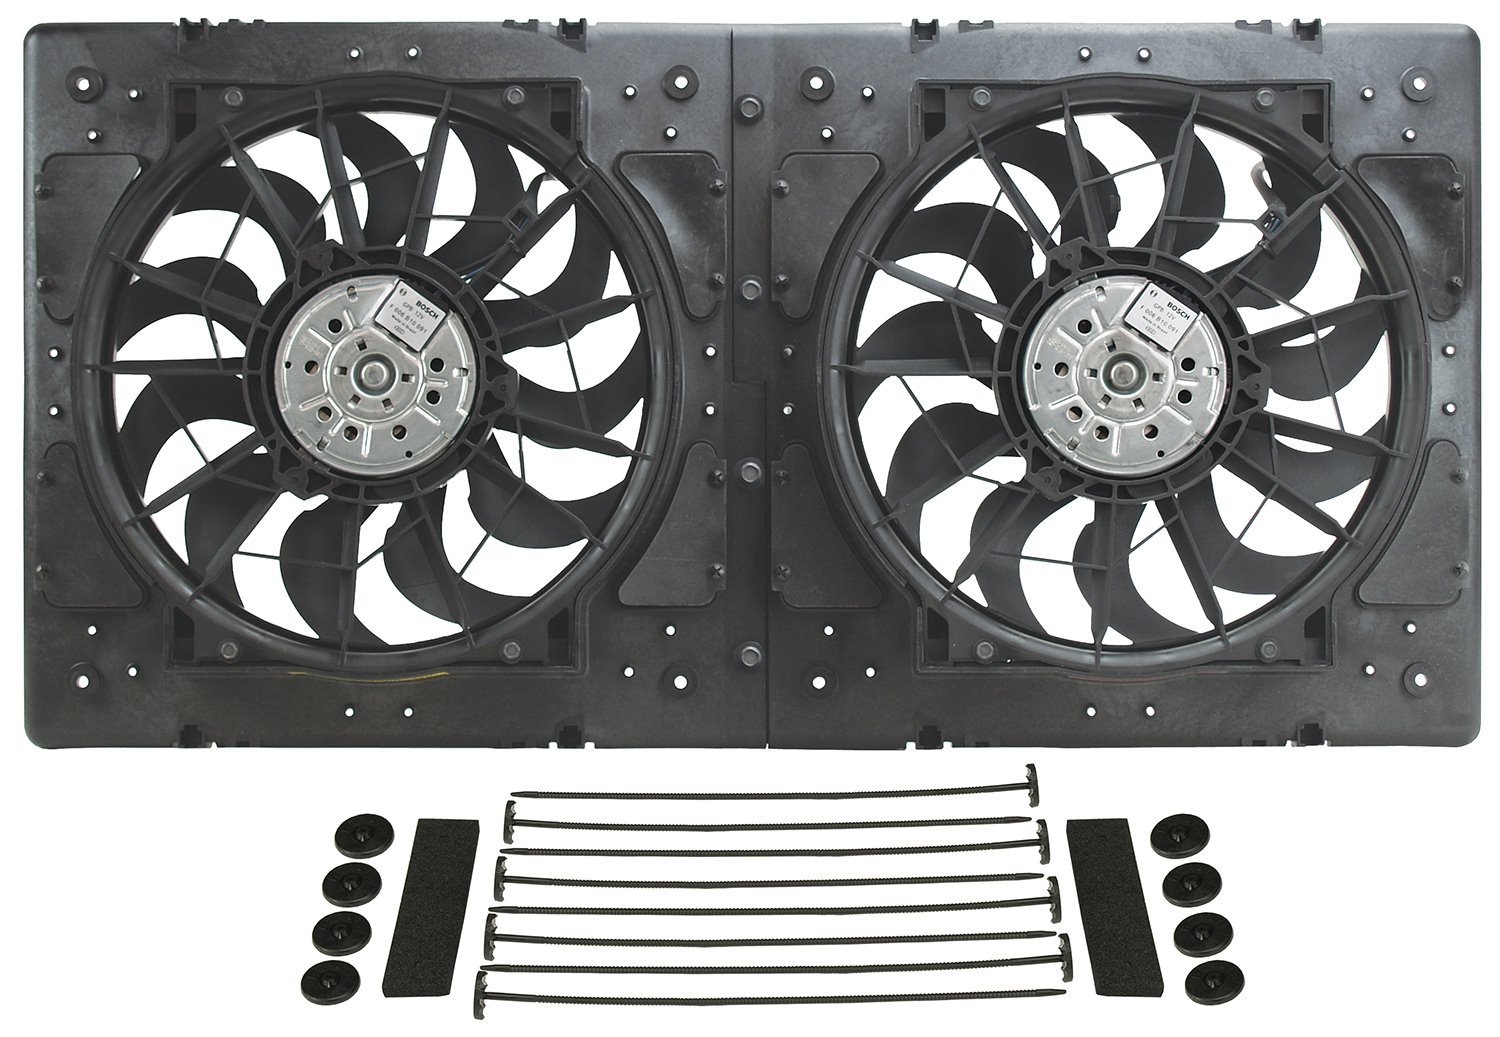 High-Output Dual Fan Assembly CFM: 4000